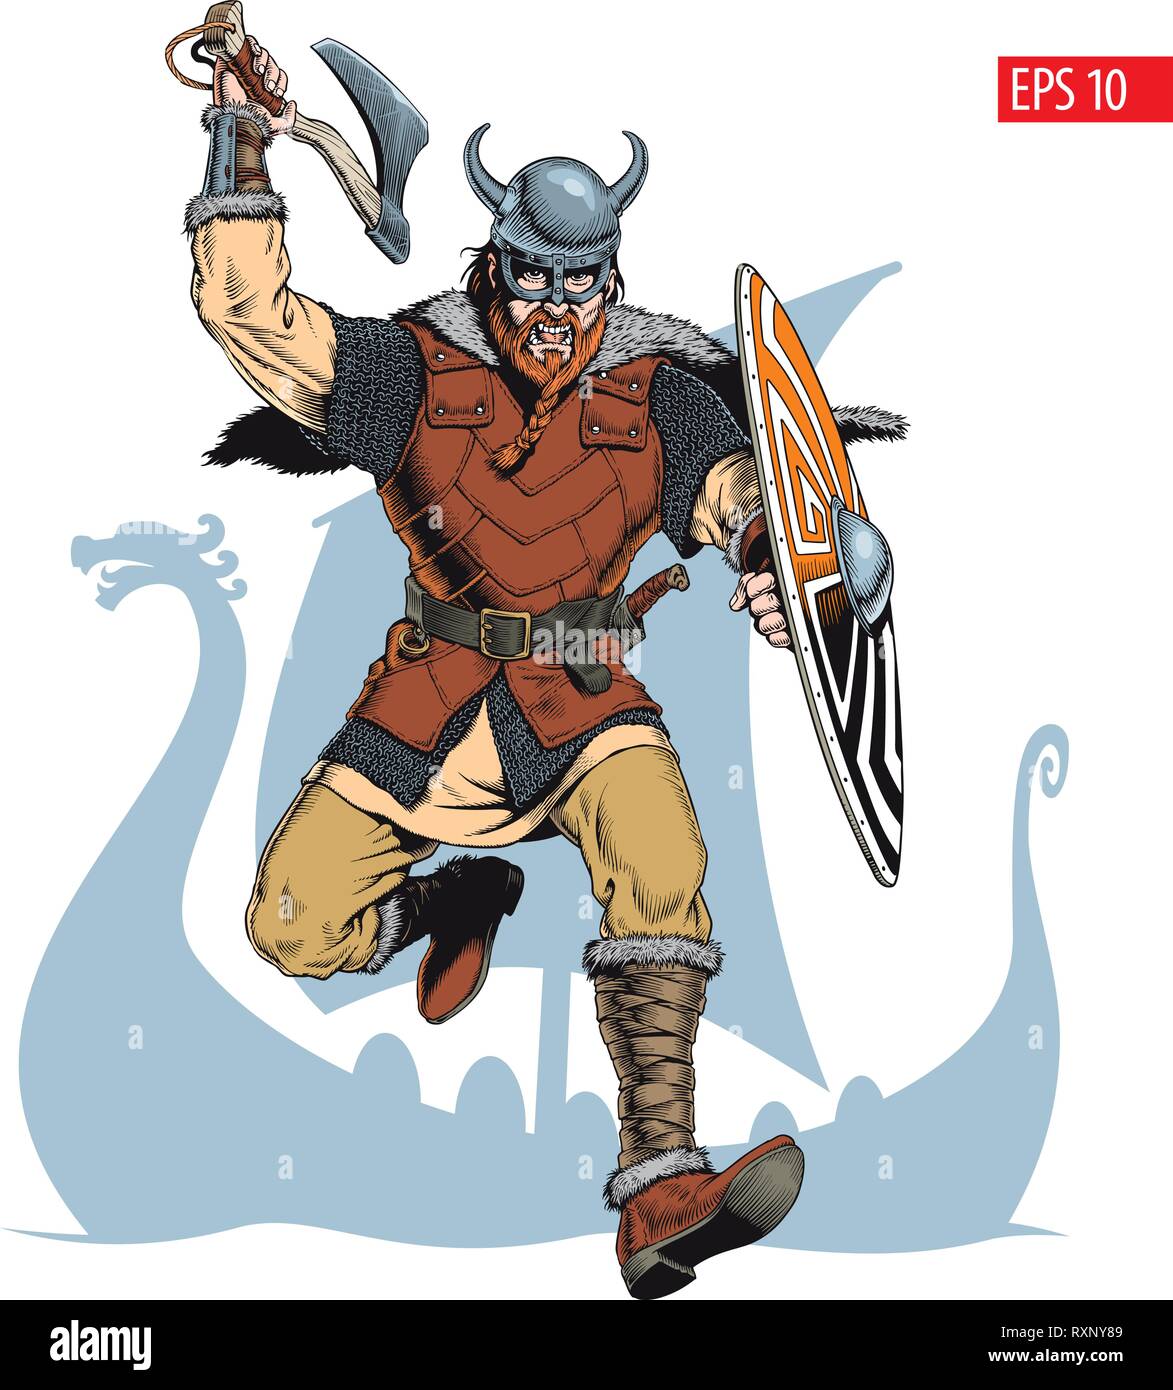 Viking with ax and shield attacks. Comic style vector illustration. Stock Vector